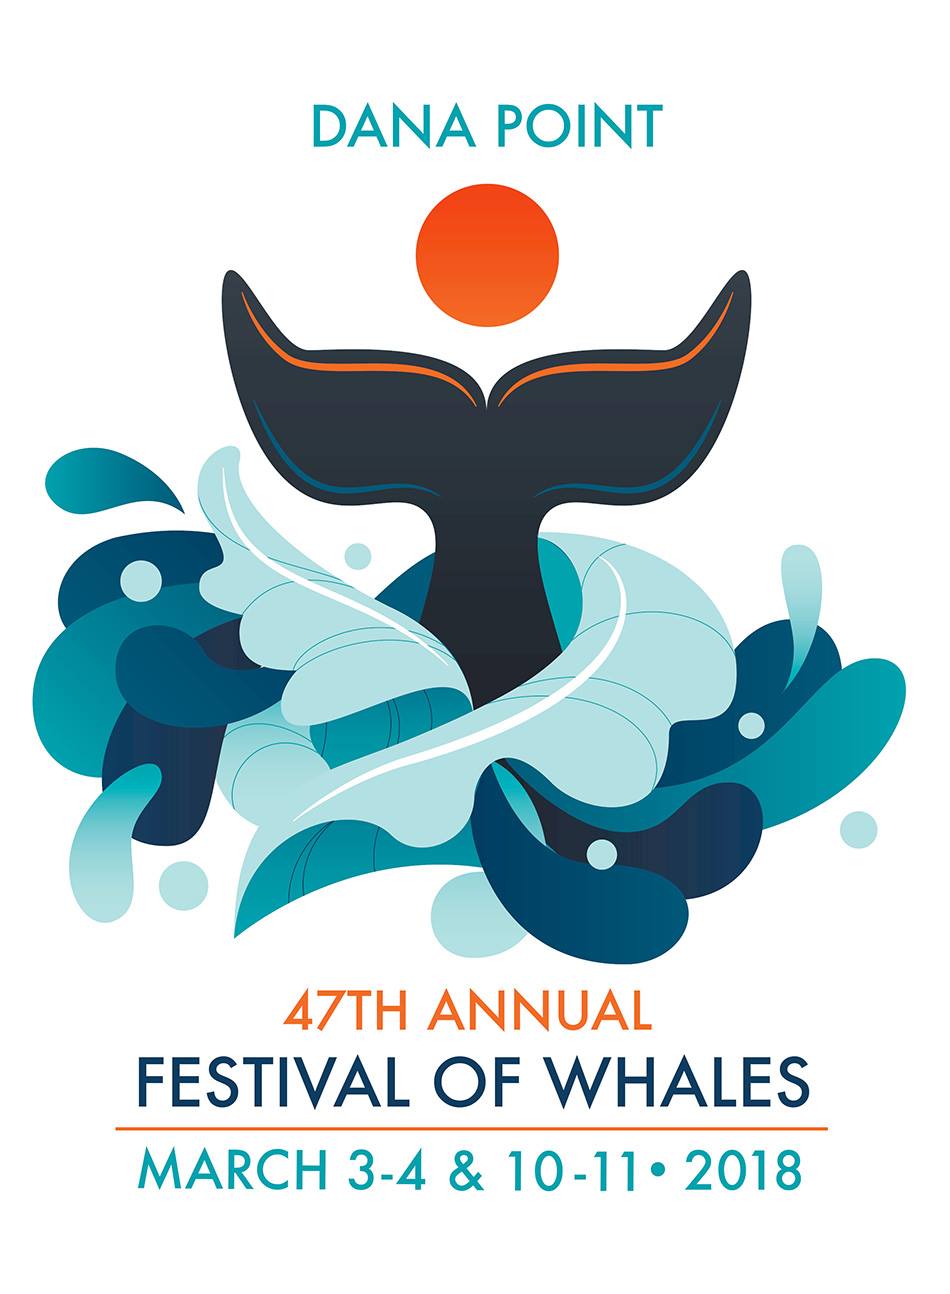 Festival of Whales Dana Point